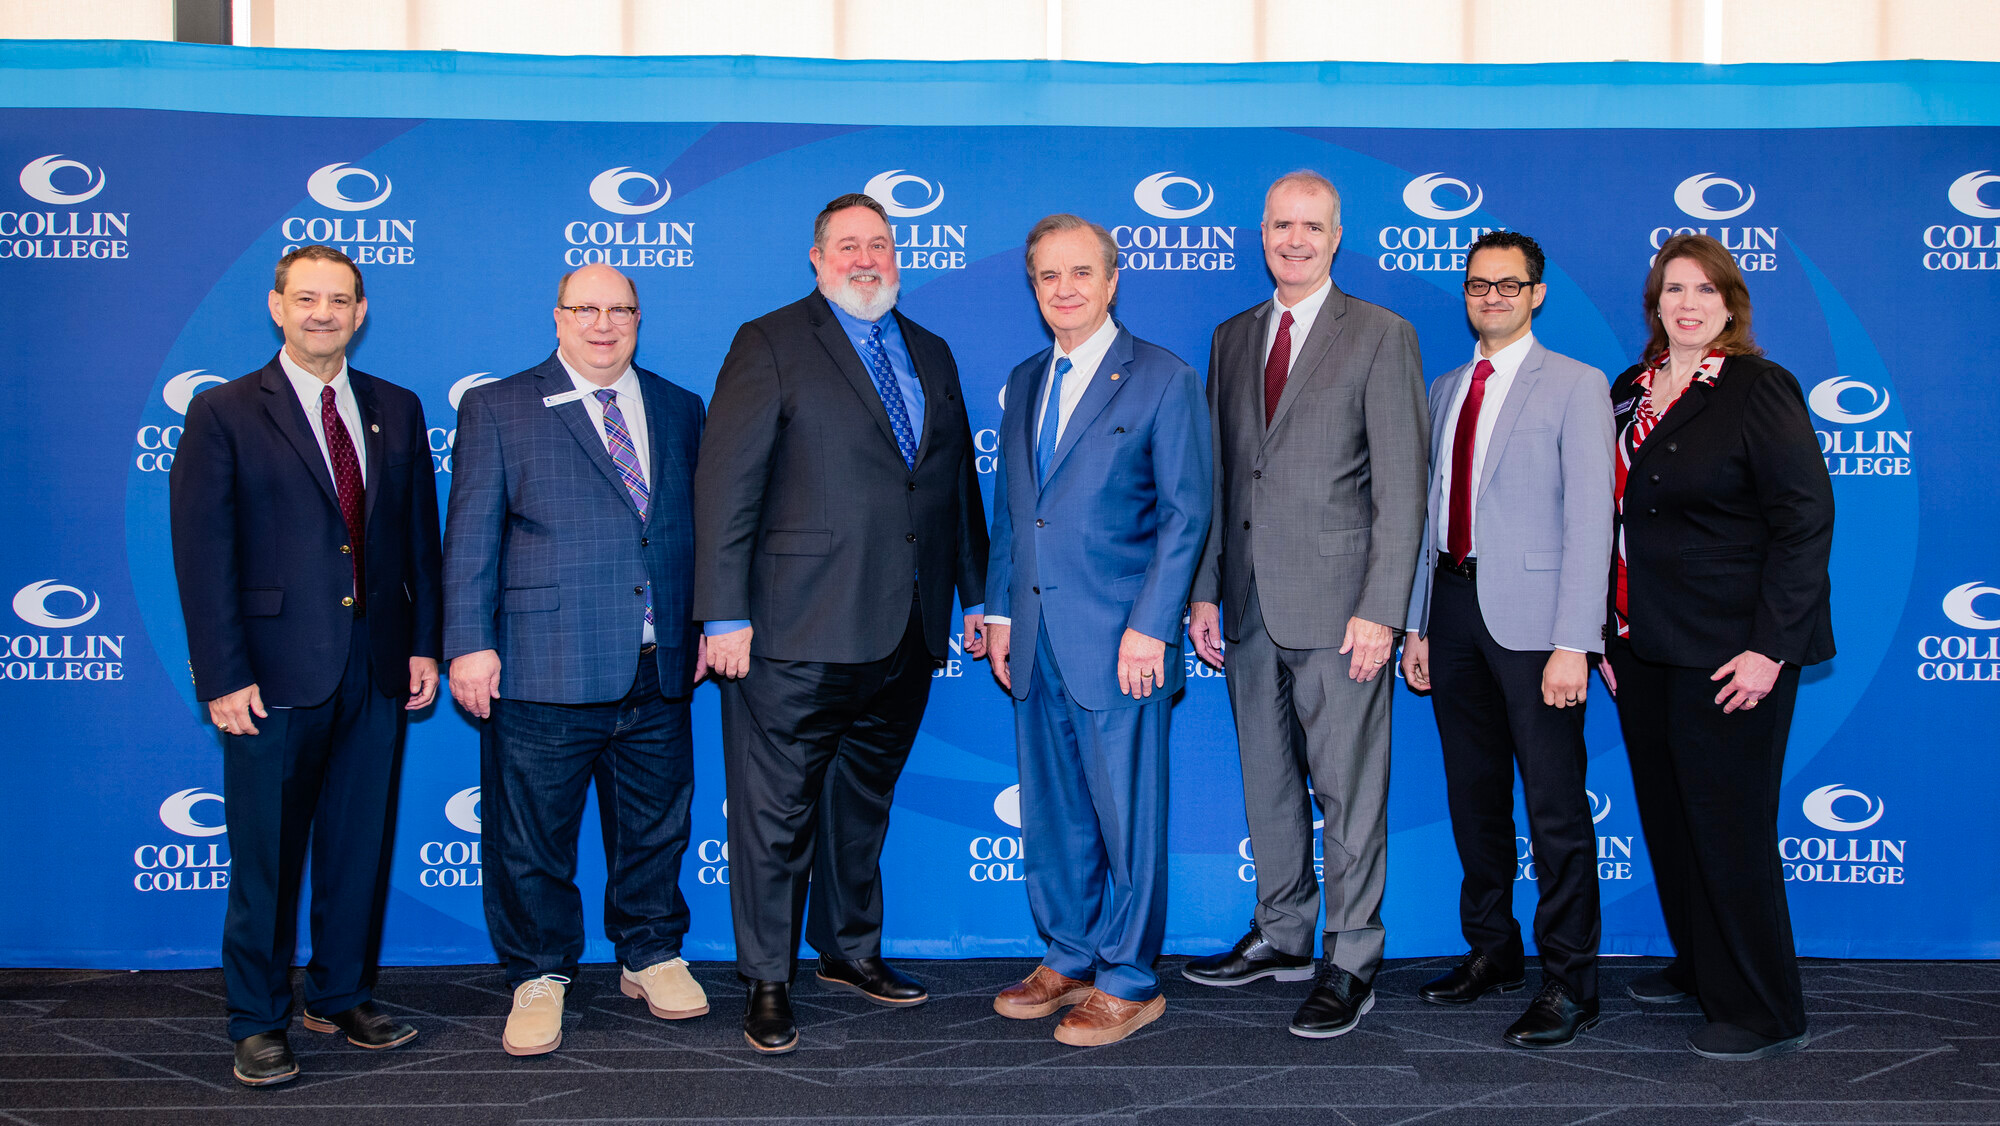 From left to right: Collin College Executive Vice President Dr. Bill King; Collin College Board of Trustees Chair Andrew Hardin; Collin College District President Dr. Neil Matkin; Texas A&amp;M University System Chancellor John Sharp; Texas A&amp;M Provost Dr. Alan Sams; Texas A&amp;M Engineering Interim Vice Chancellor and Dean Dr. Joe Elabd; and Assistant Vice Chancellor for Academic and Outreach Programs Dr. Cindy Lawley.